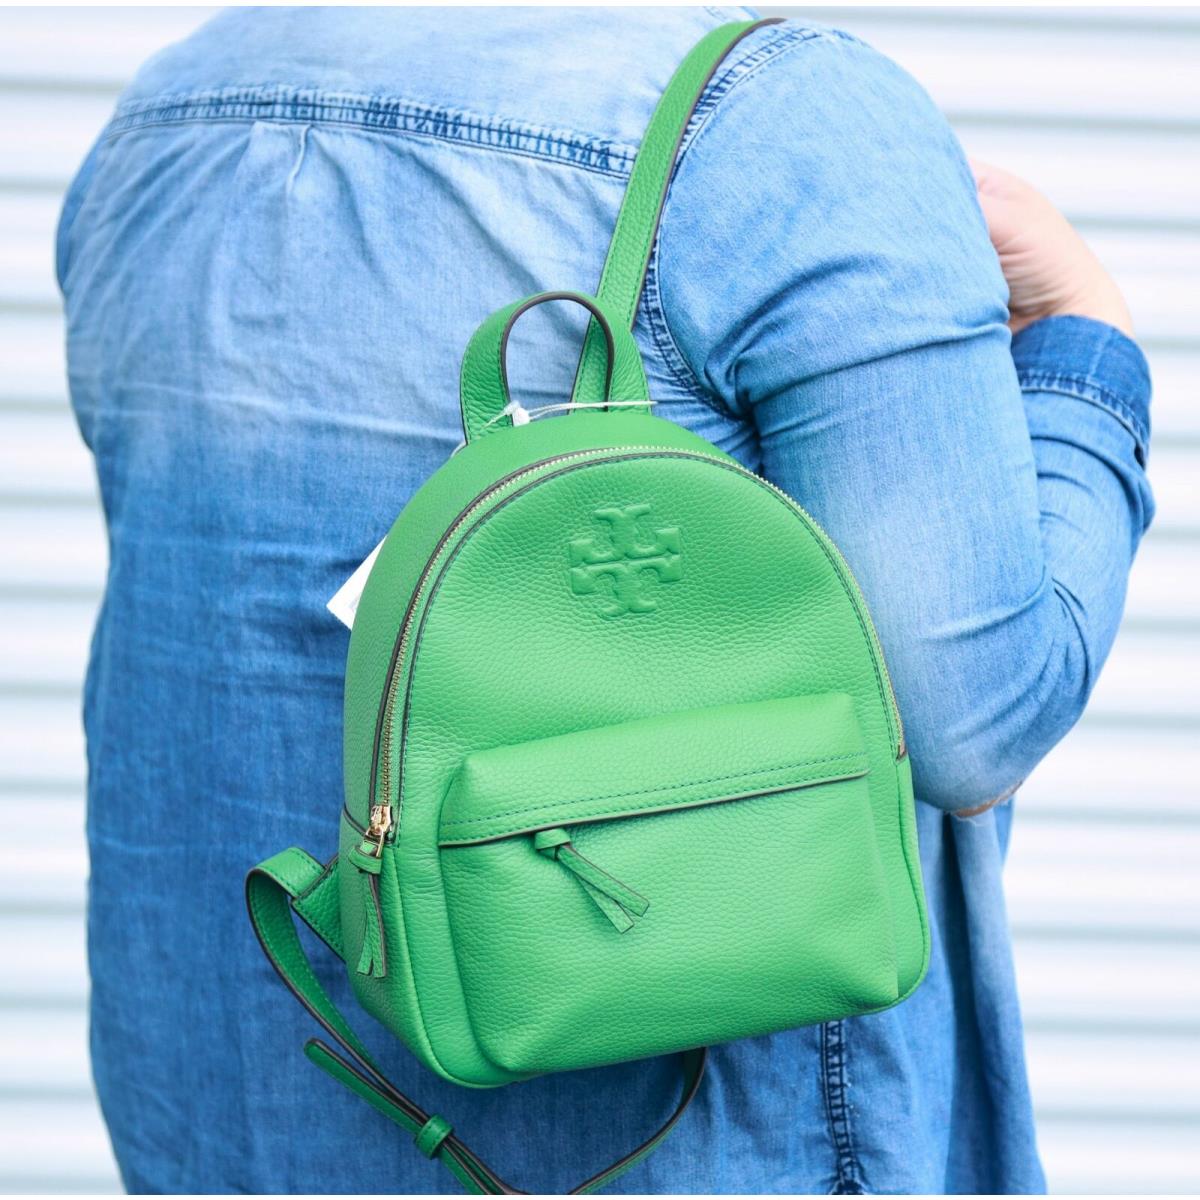 Tory Burch Thea Pebble Leather Backpack Green